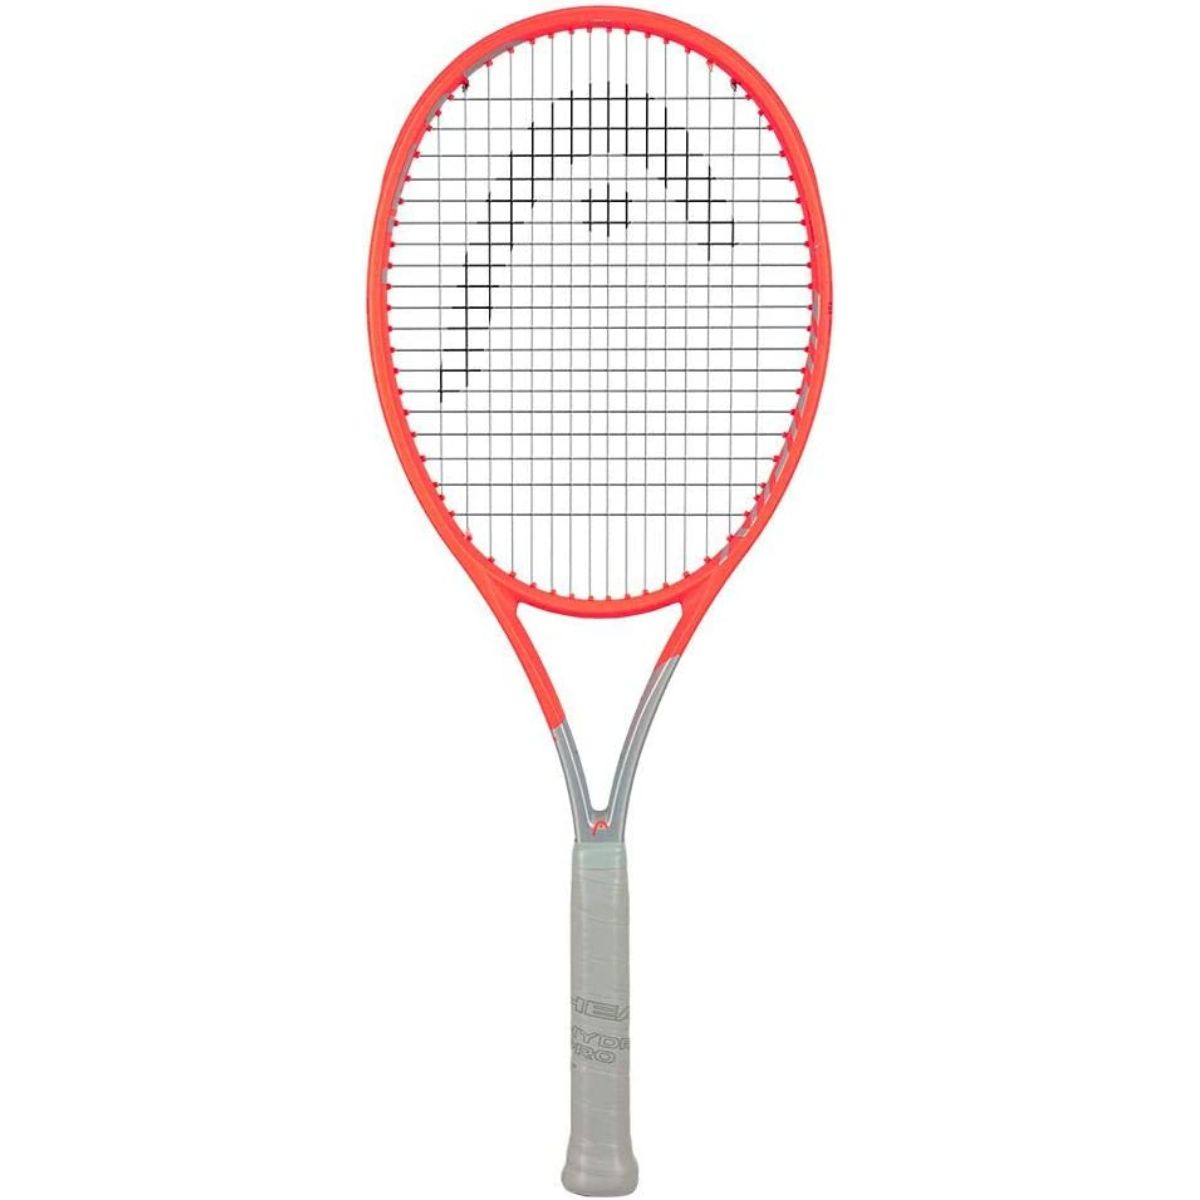 The Best Tennis Rackets for Flat Hitters Options: Head Radical MP